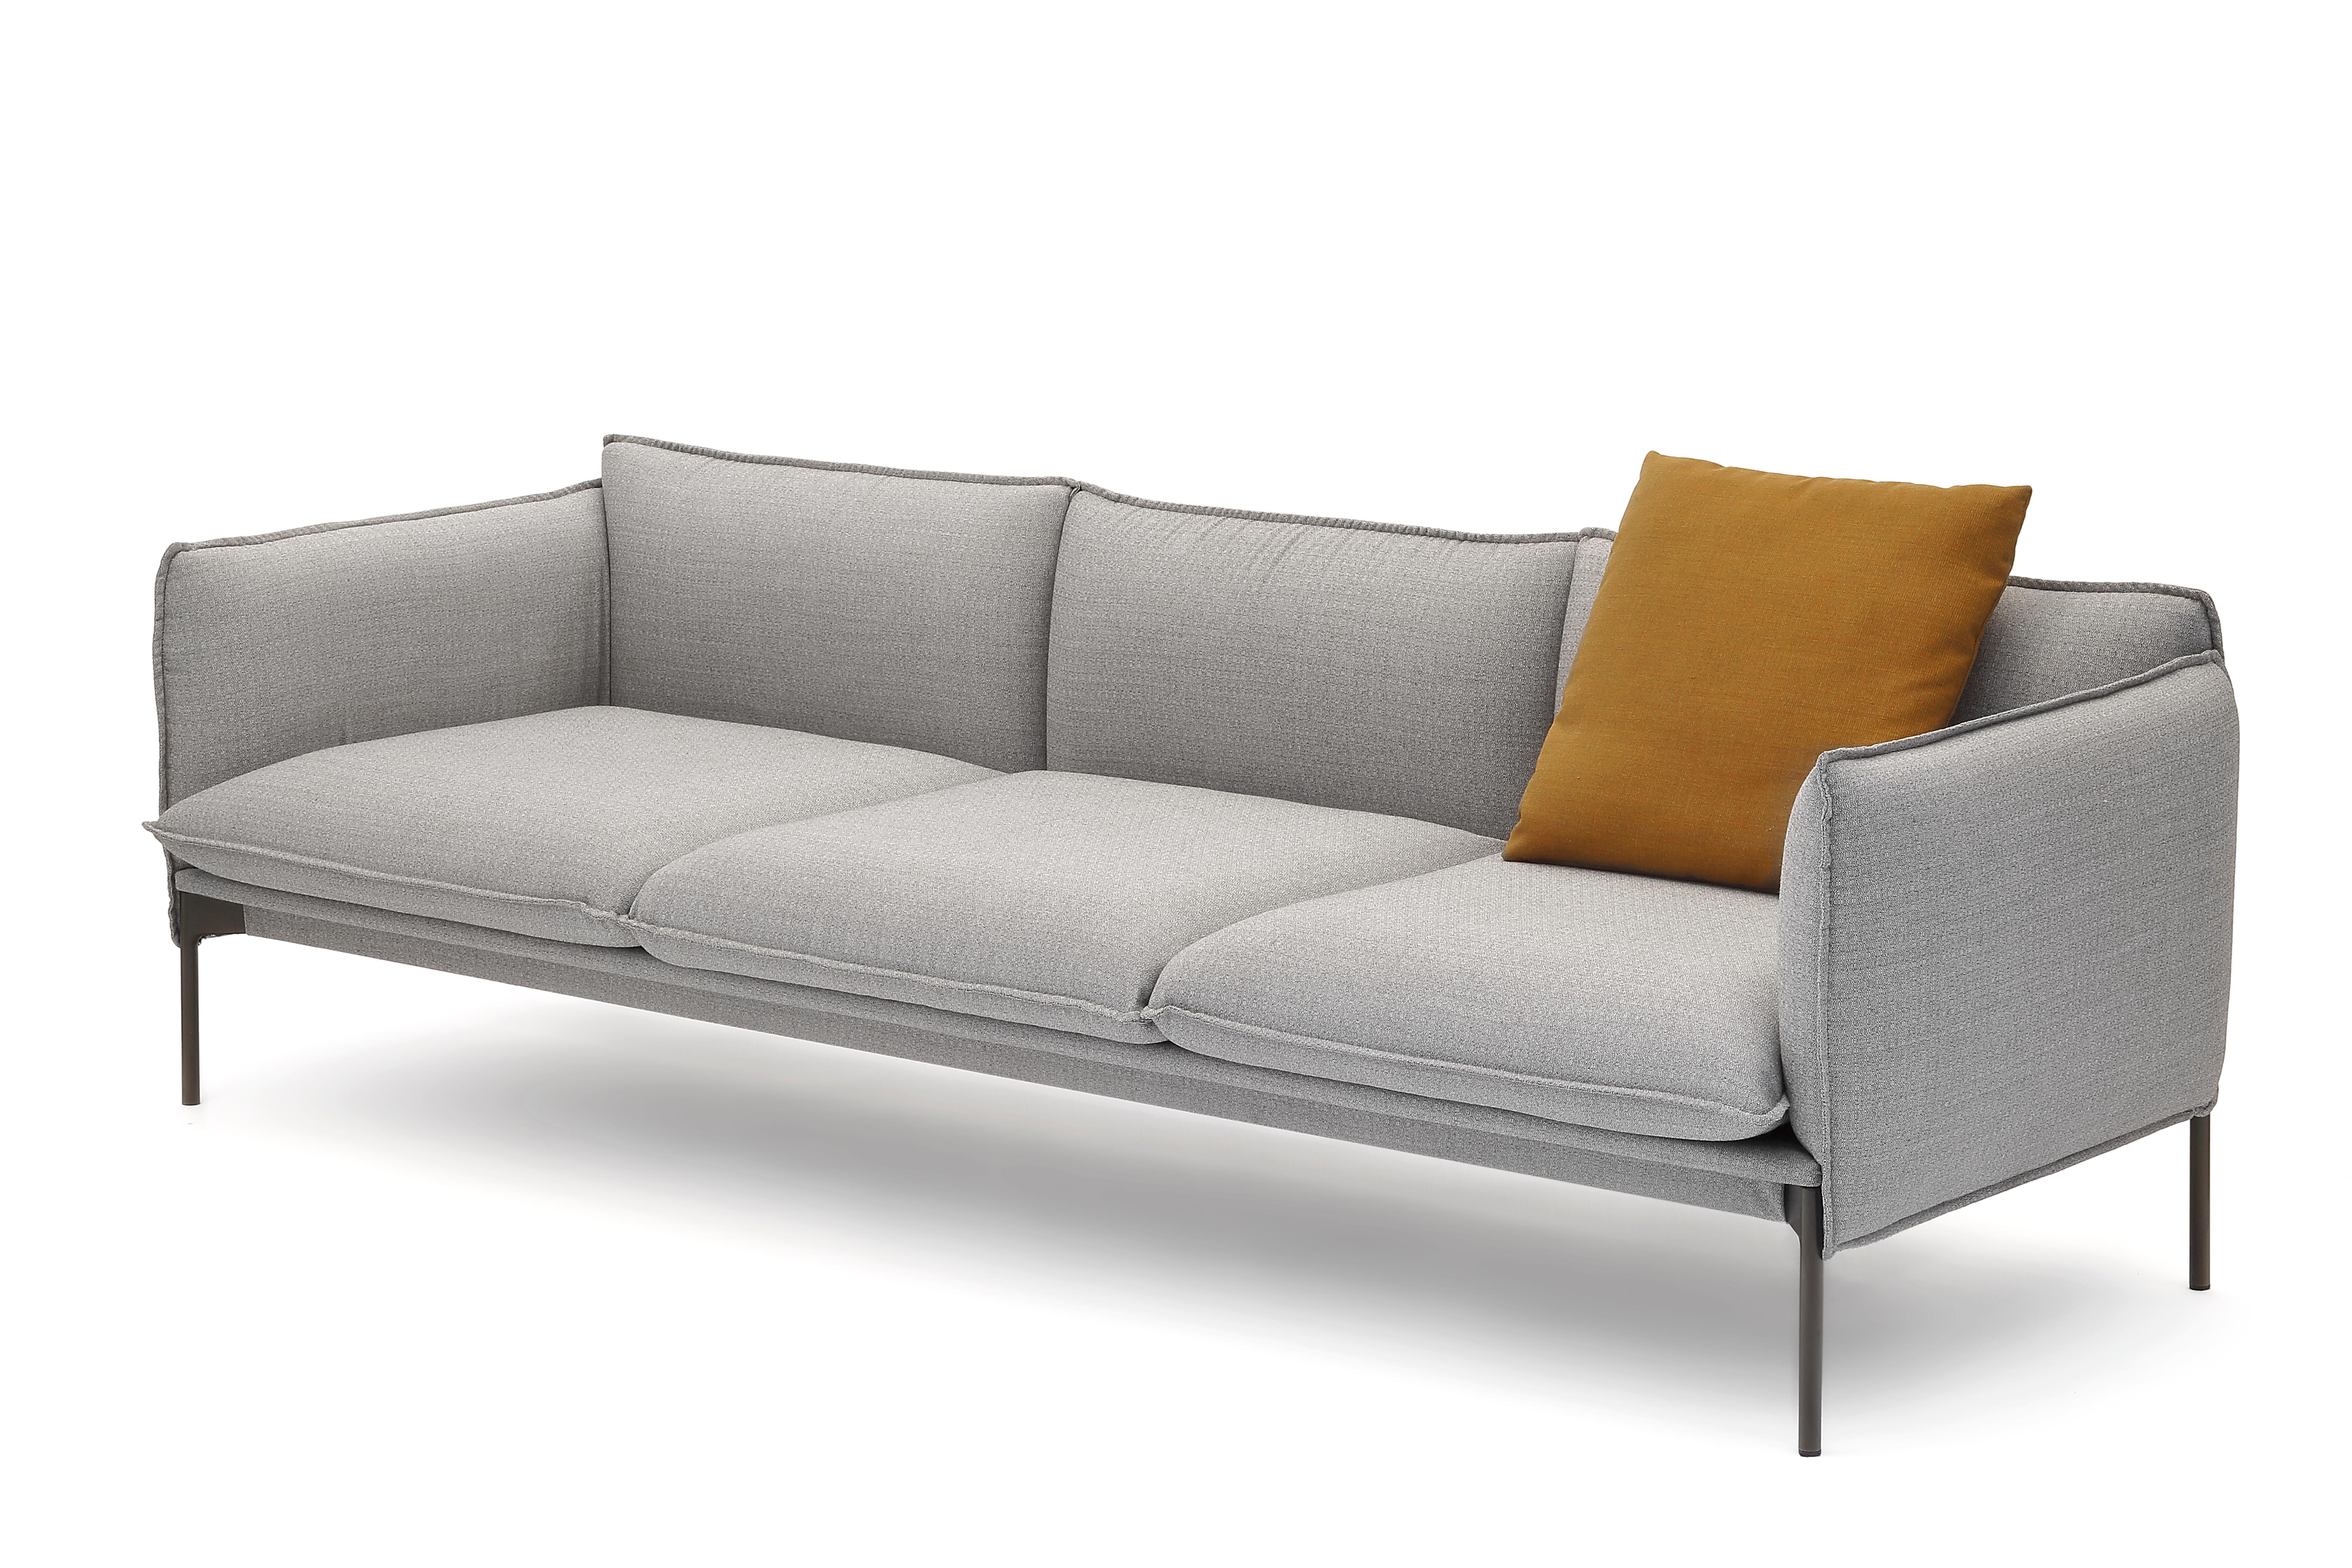 Palmspring sofa by Anderssen & Voll.
2020.
Materials: Bronze lacquered metal structure, seat and back in polyurethane foam, upholstered
in fabric
Dimensions: 230 x 83 x 69 cm
 Seat: 40 cm

3-seater sofa in polyurethane foam of different